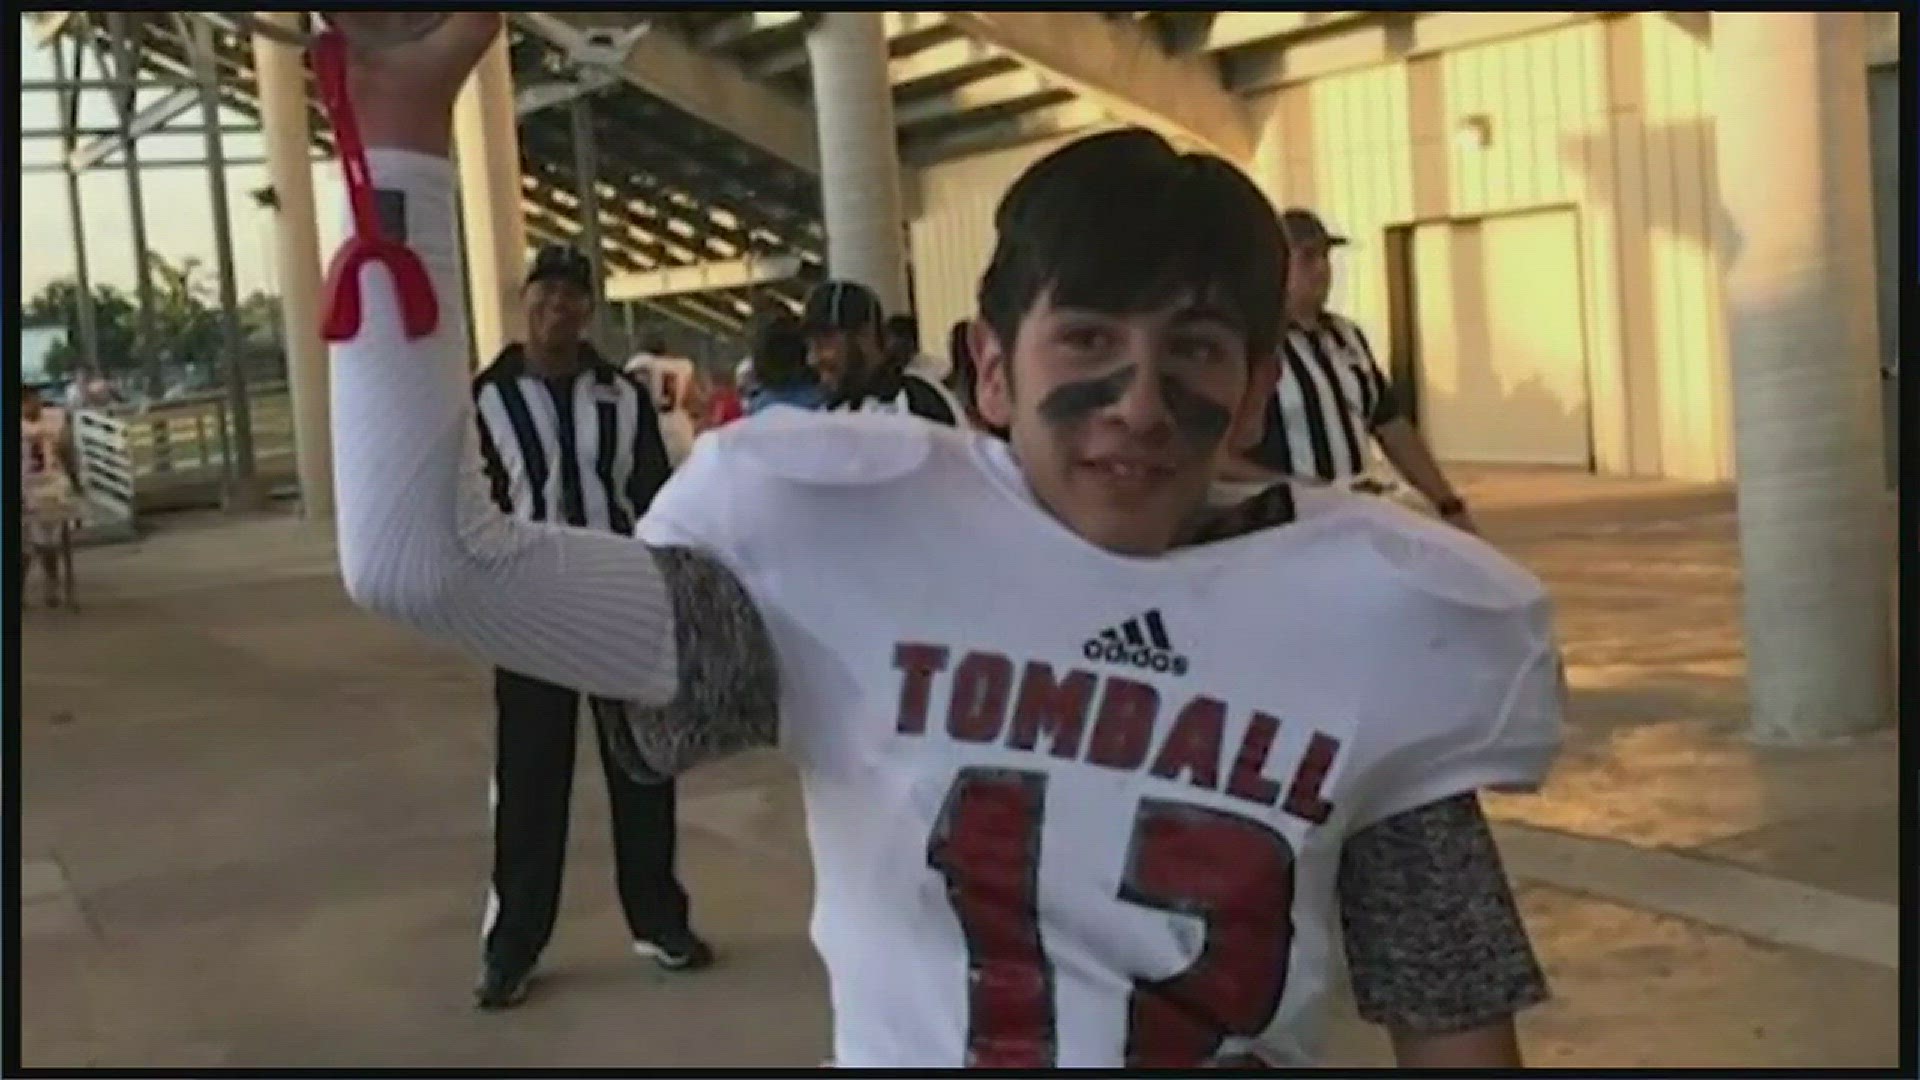 Tomball HS students competed against each other in a scrimmage, but one of them really came out a winner.